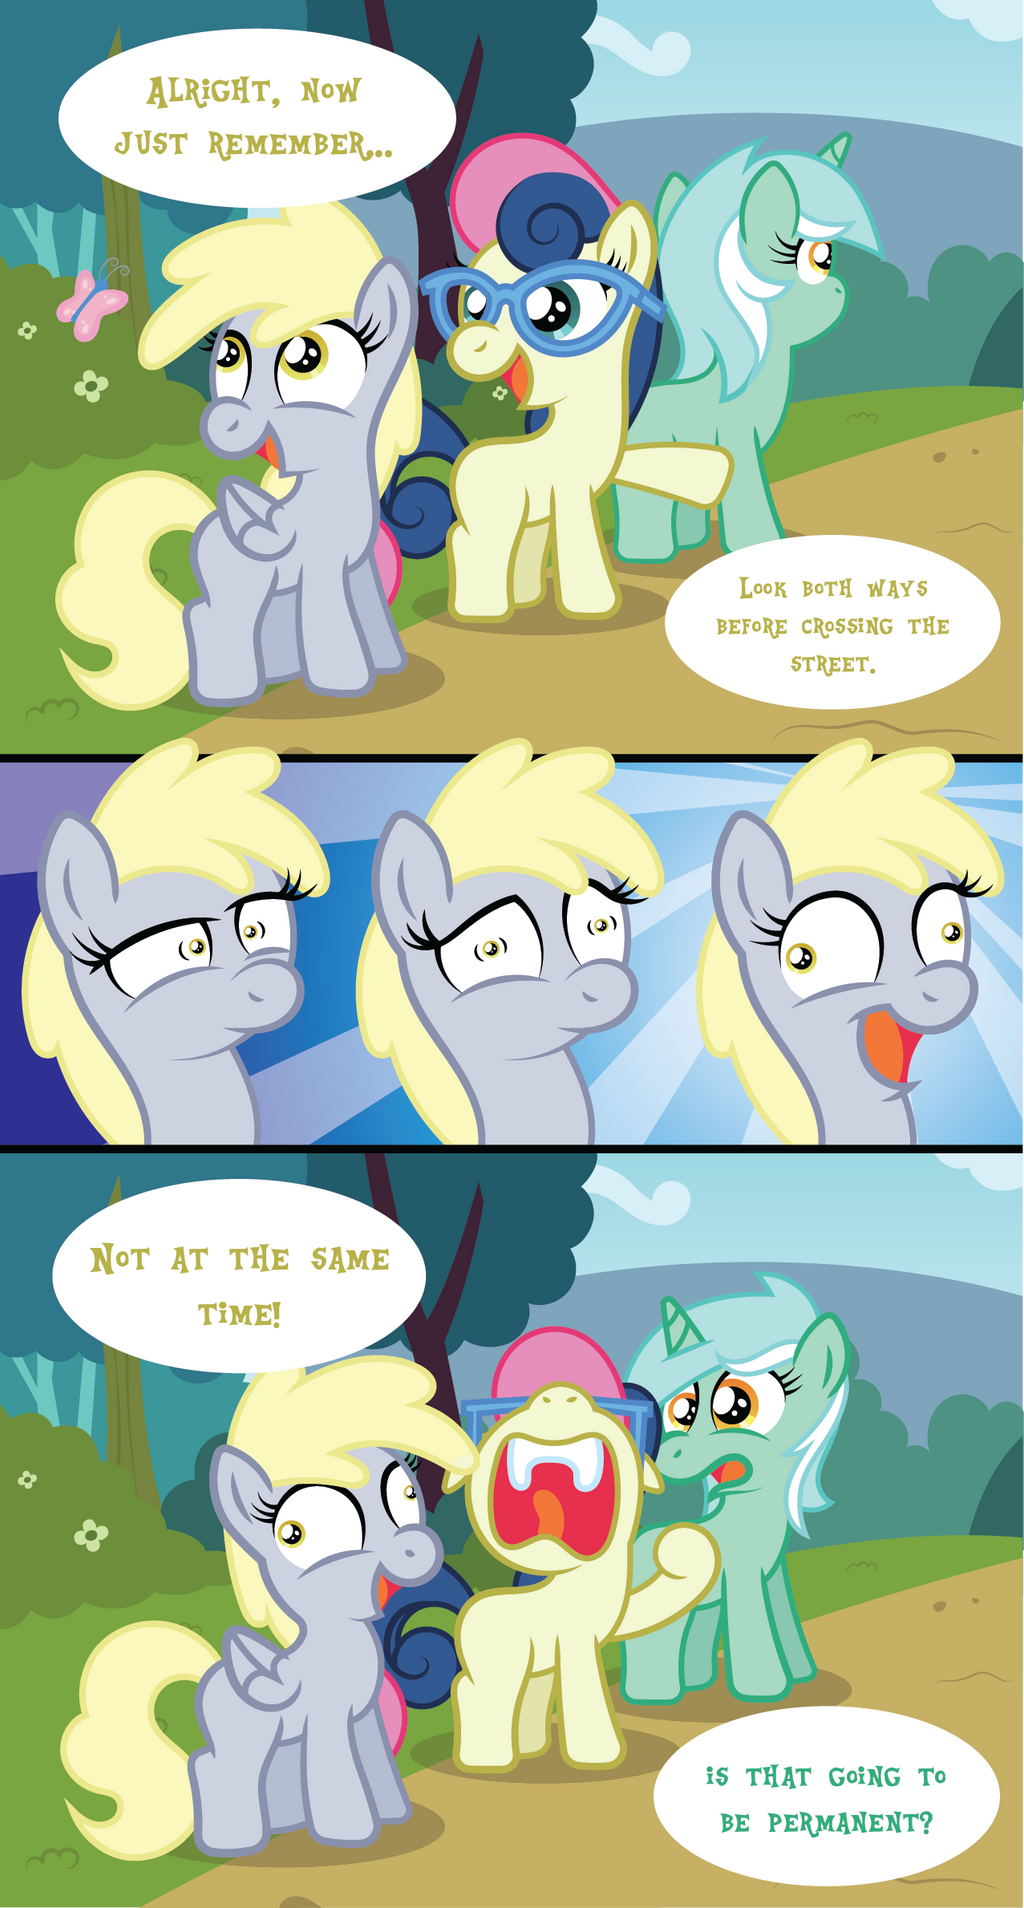 [Obrázek: how_derpy_s_got_that_way_by_t_3000-d9si8yc.png]